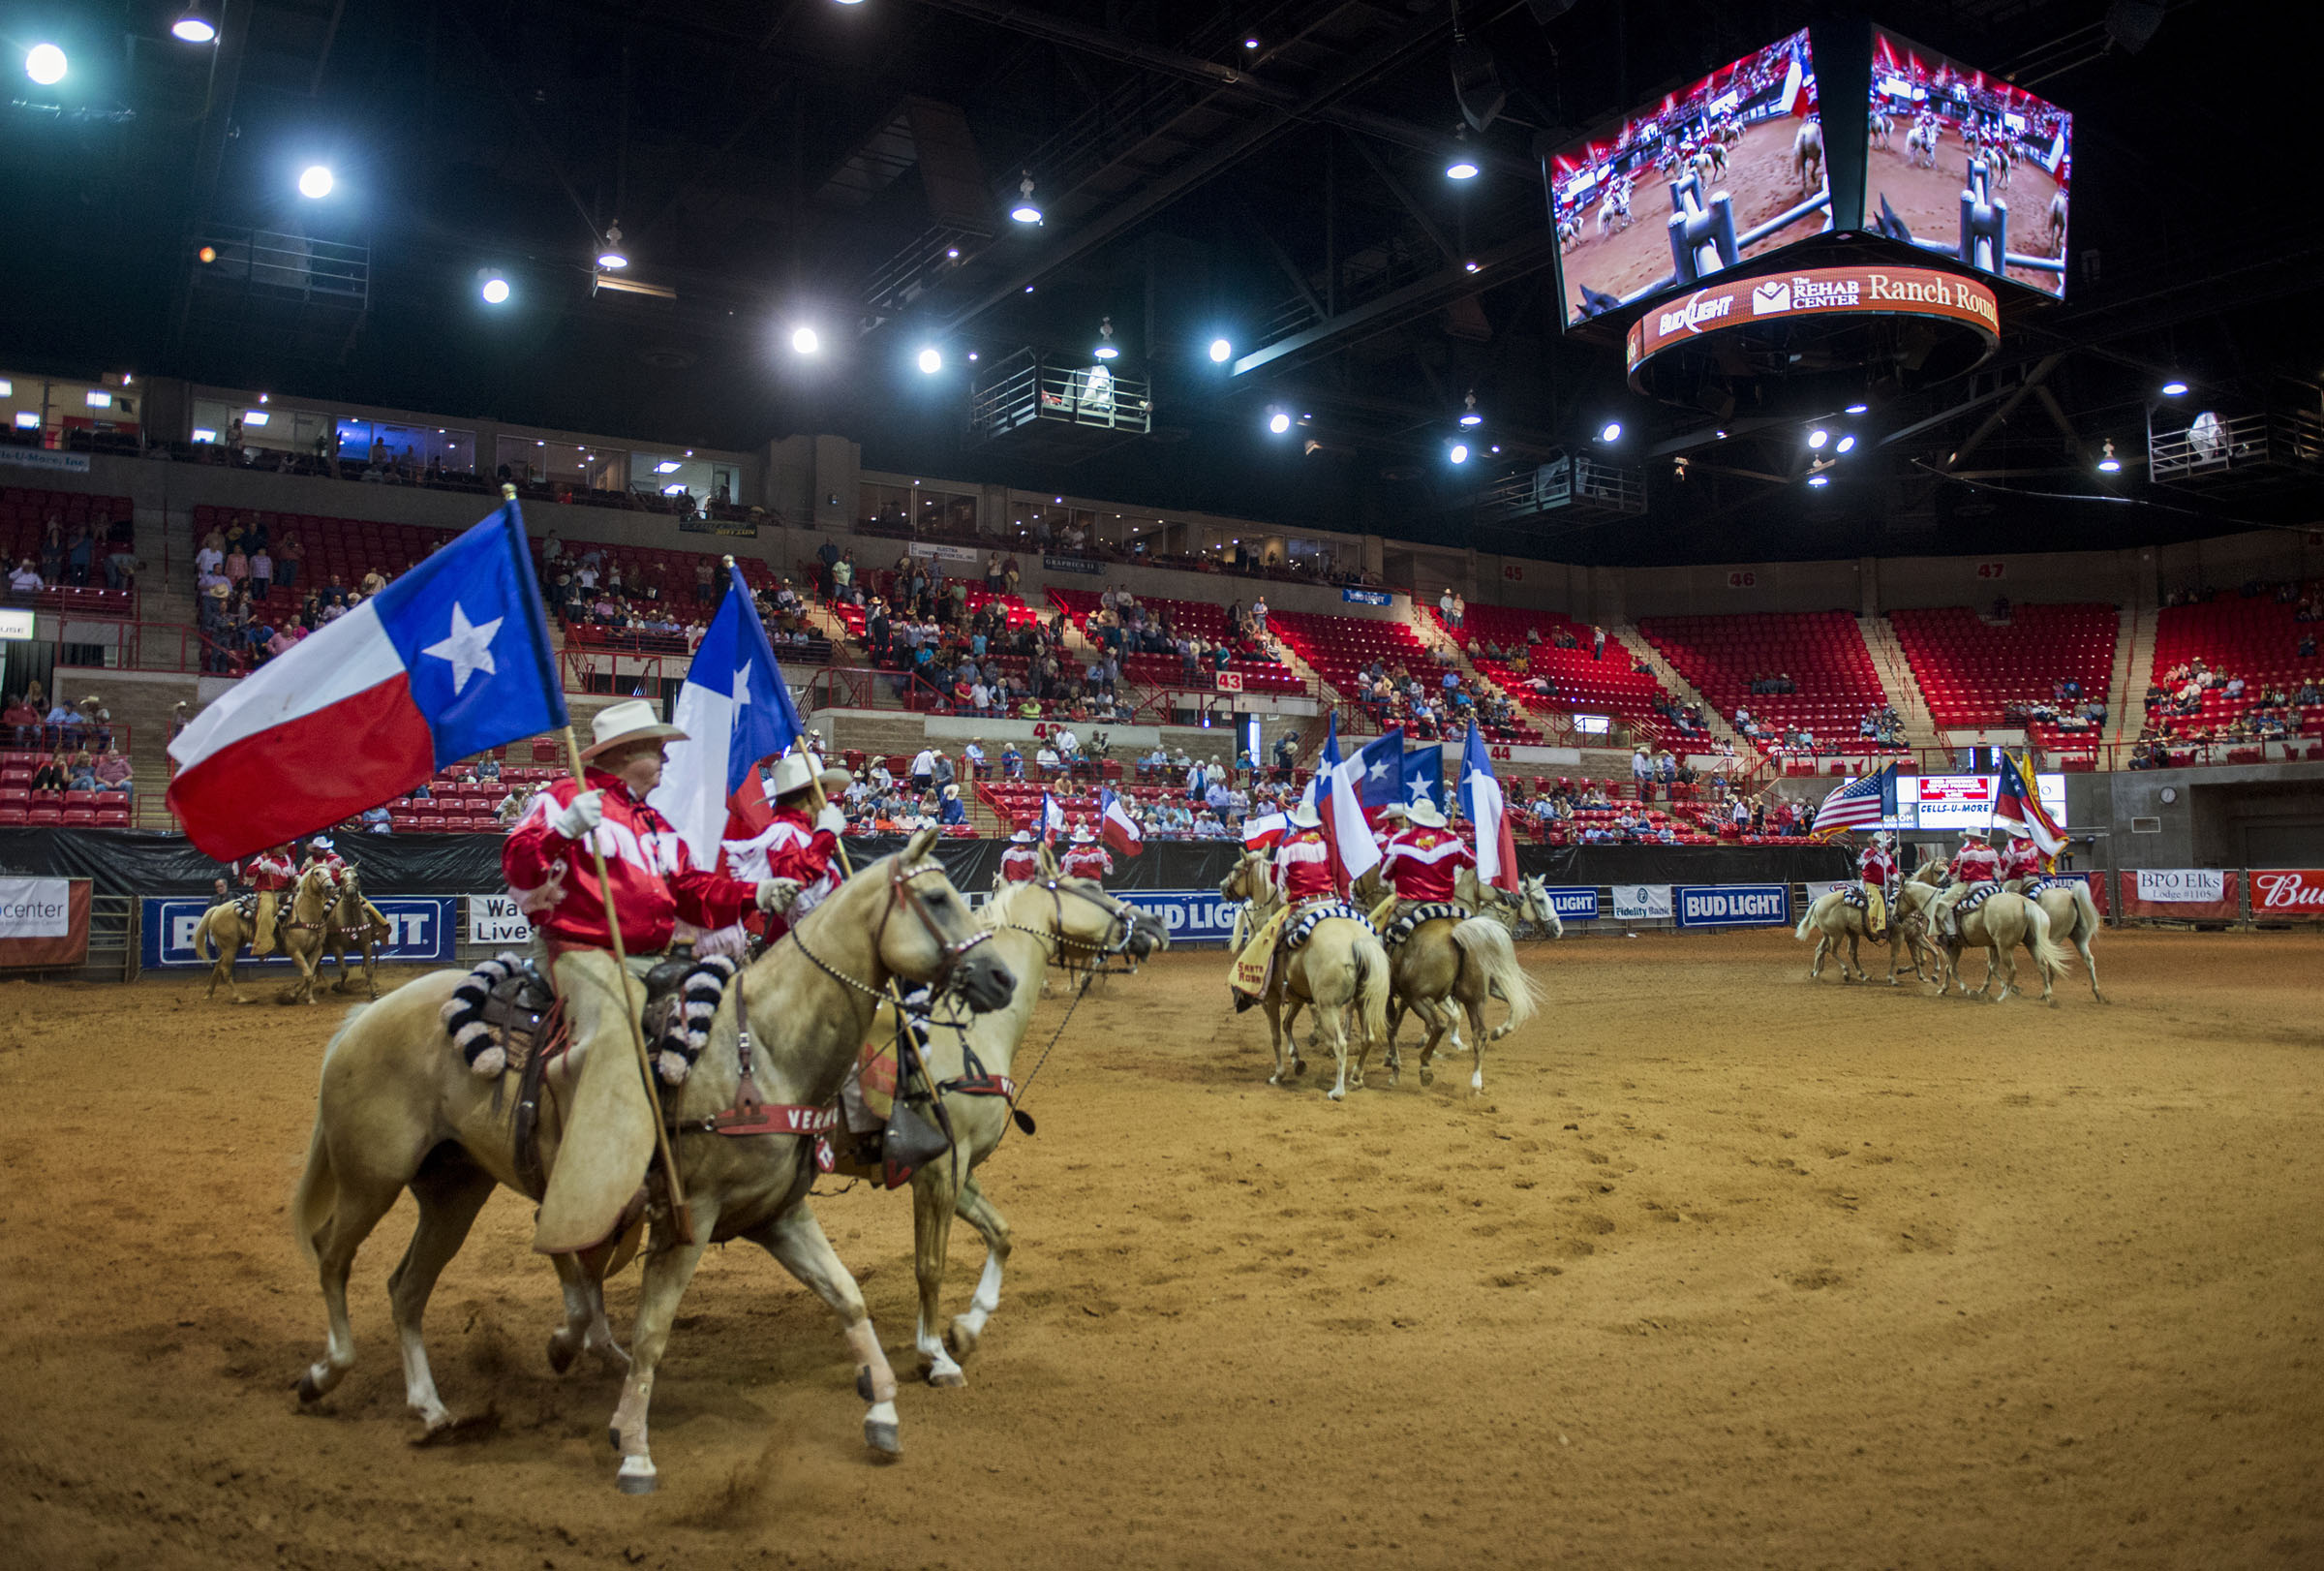 Riders on horseback carry Texas flags in a sports arena.